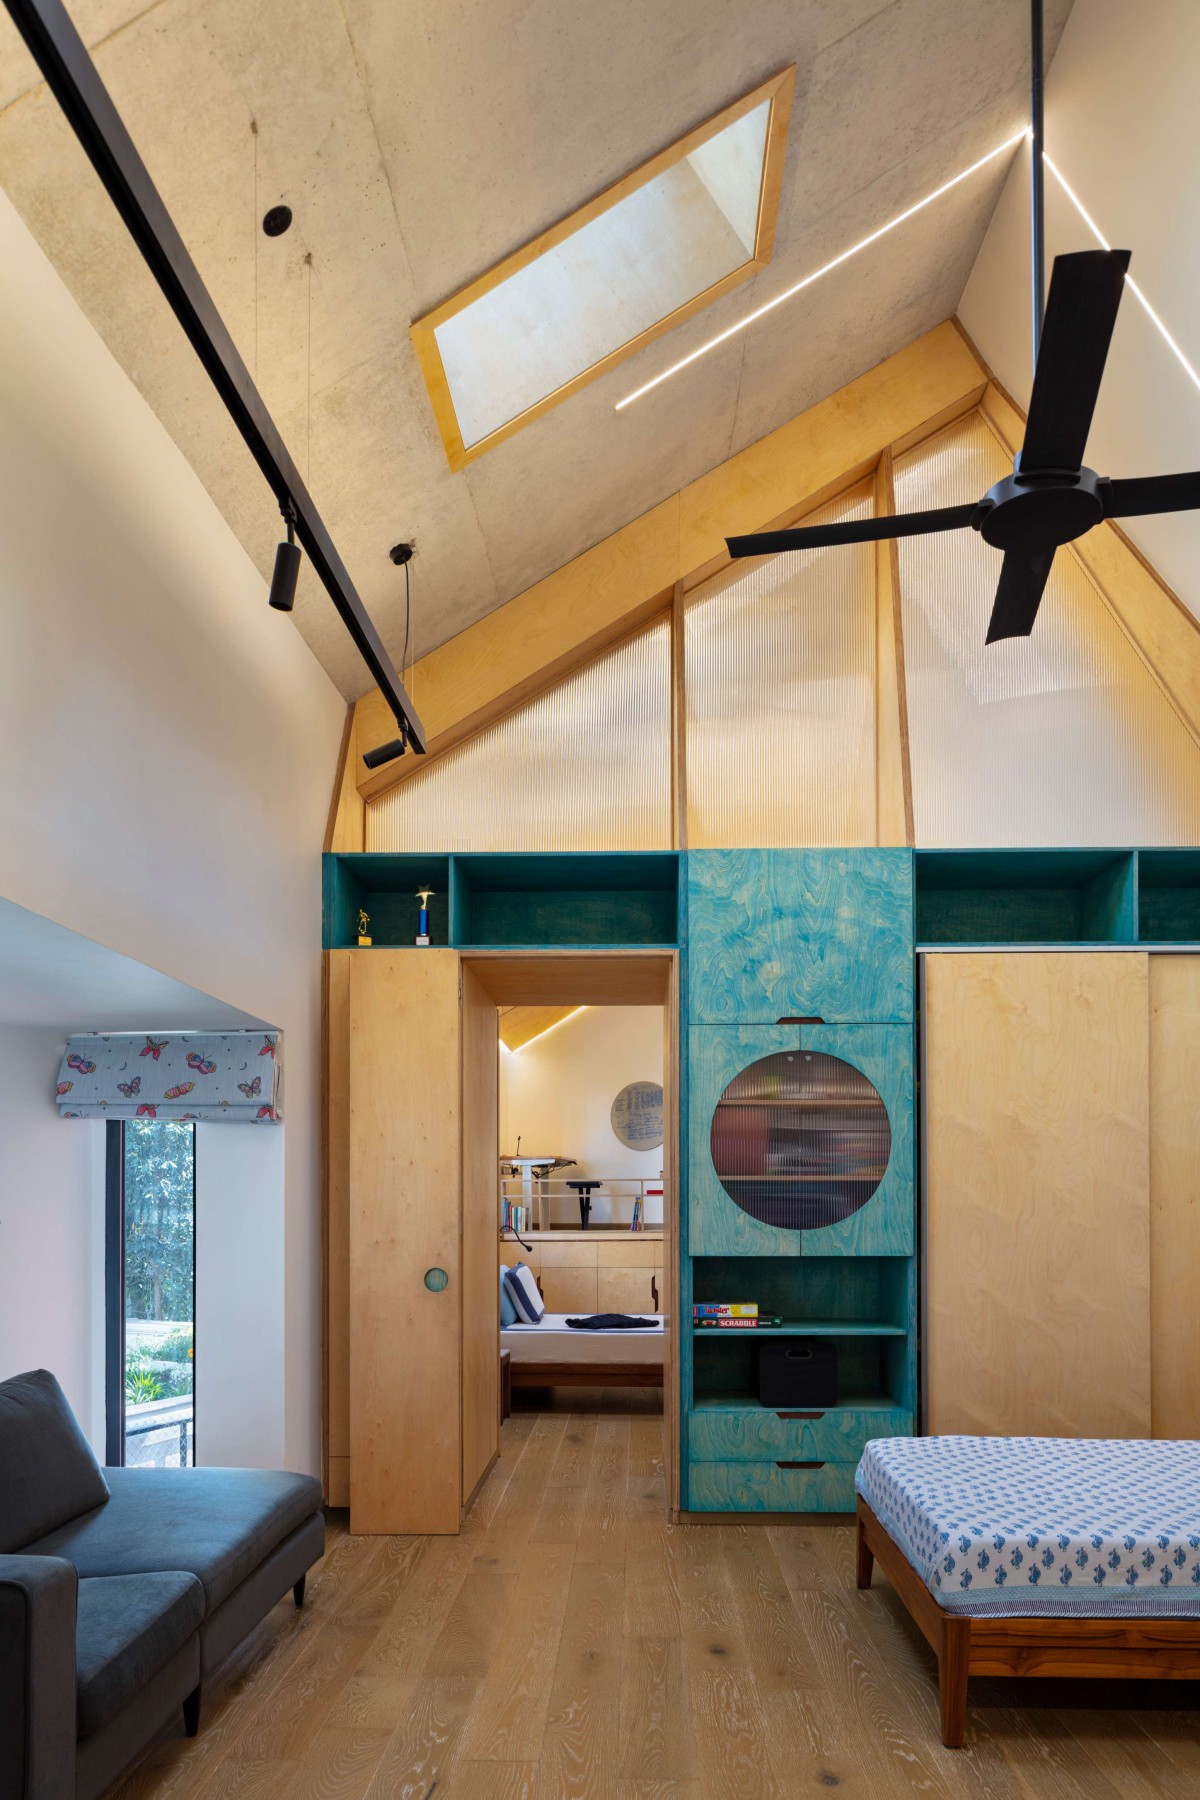 Bedroom of Chromatic House by Anagram Architects